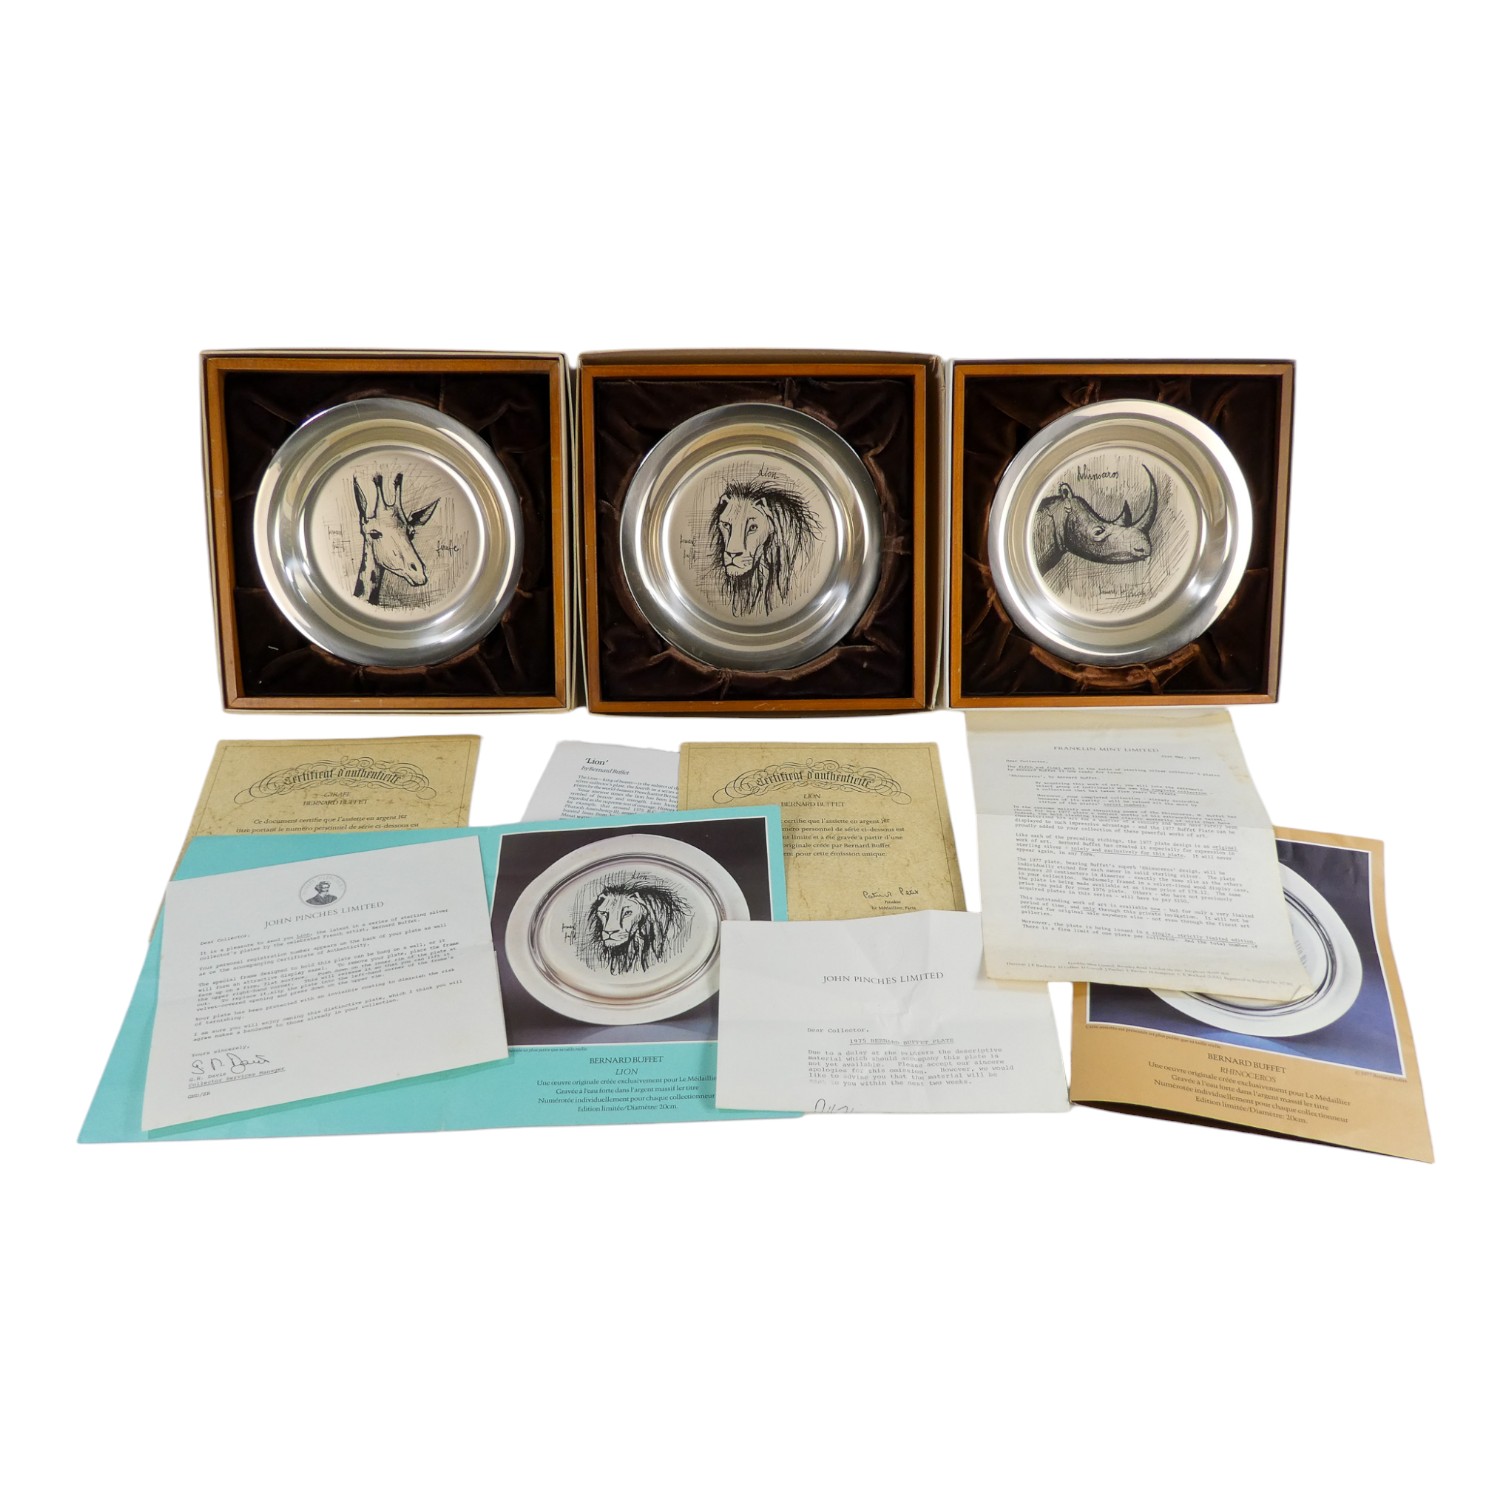 A collection of three silver plates - engraved limited editions featuring images of African